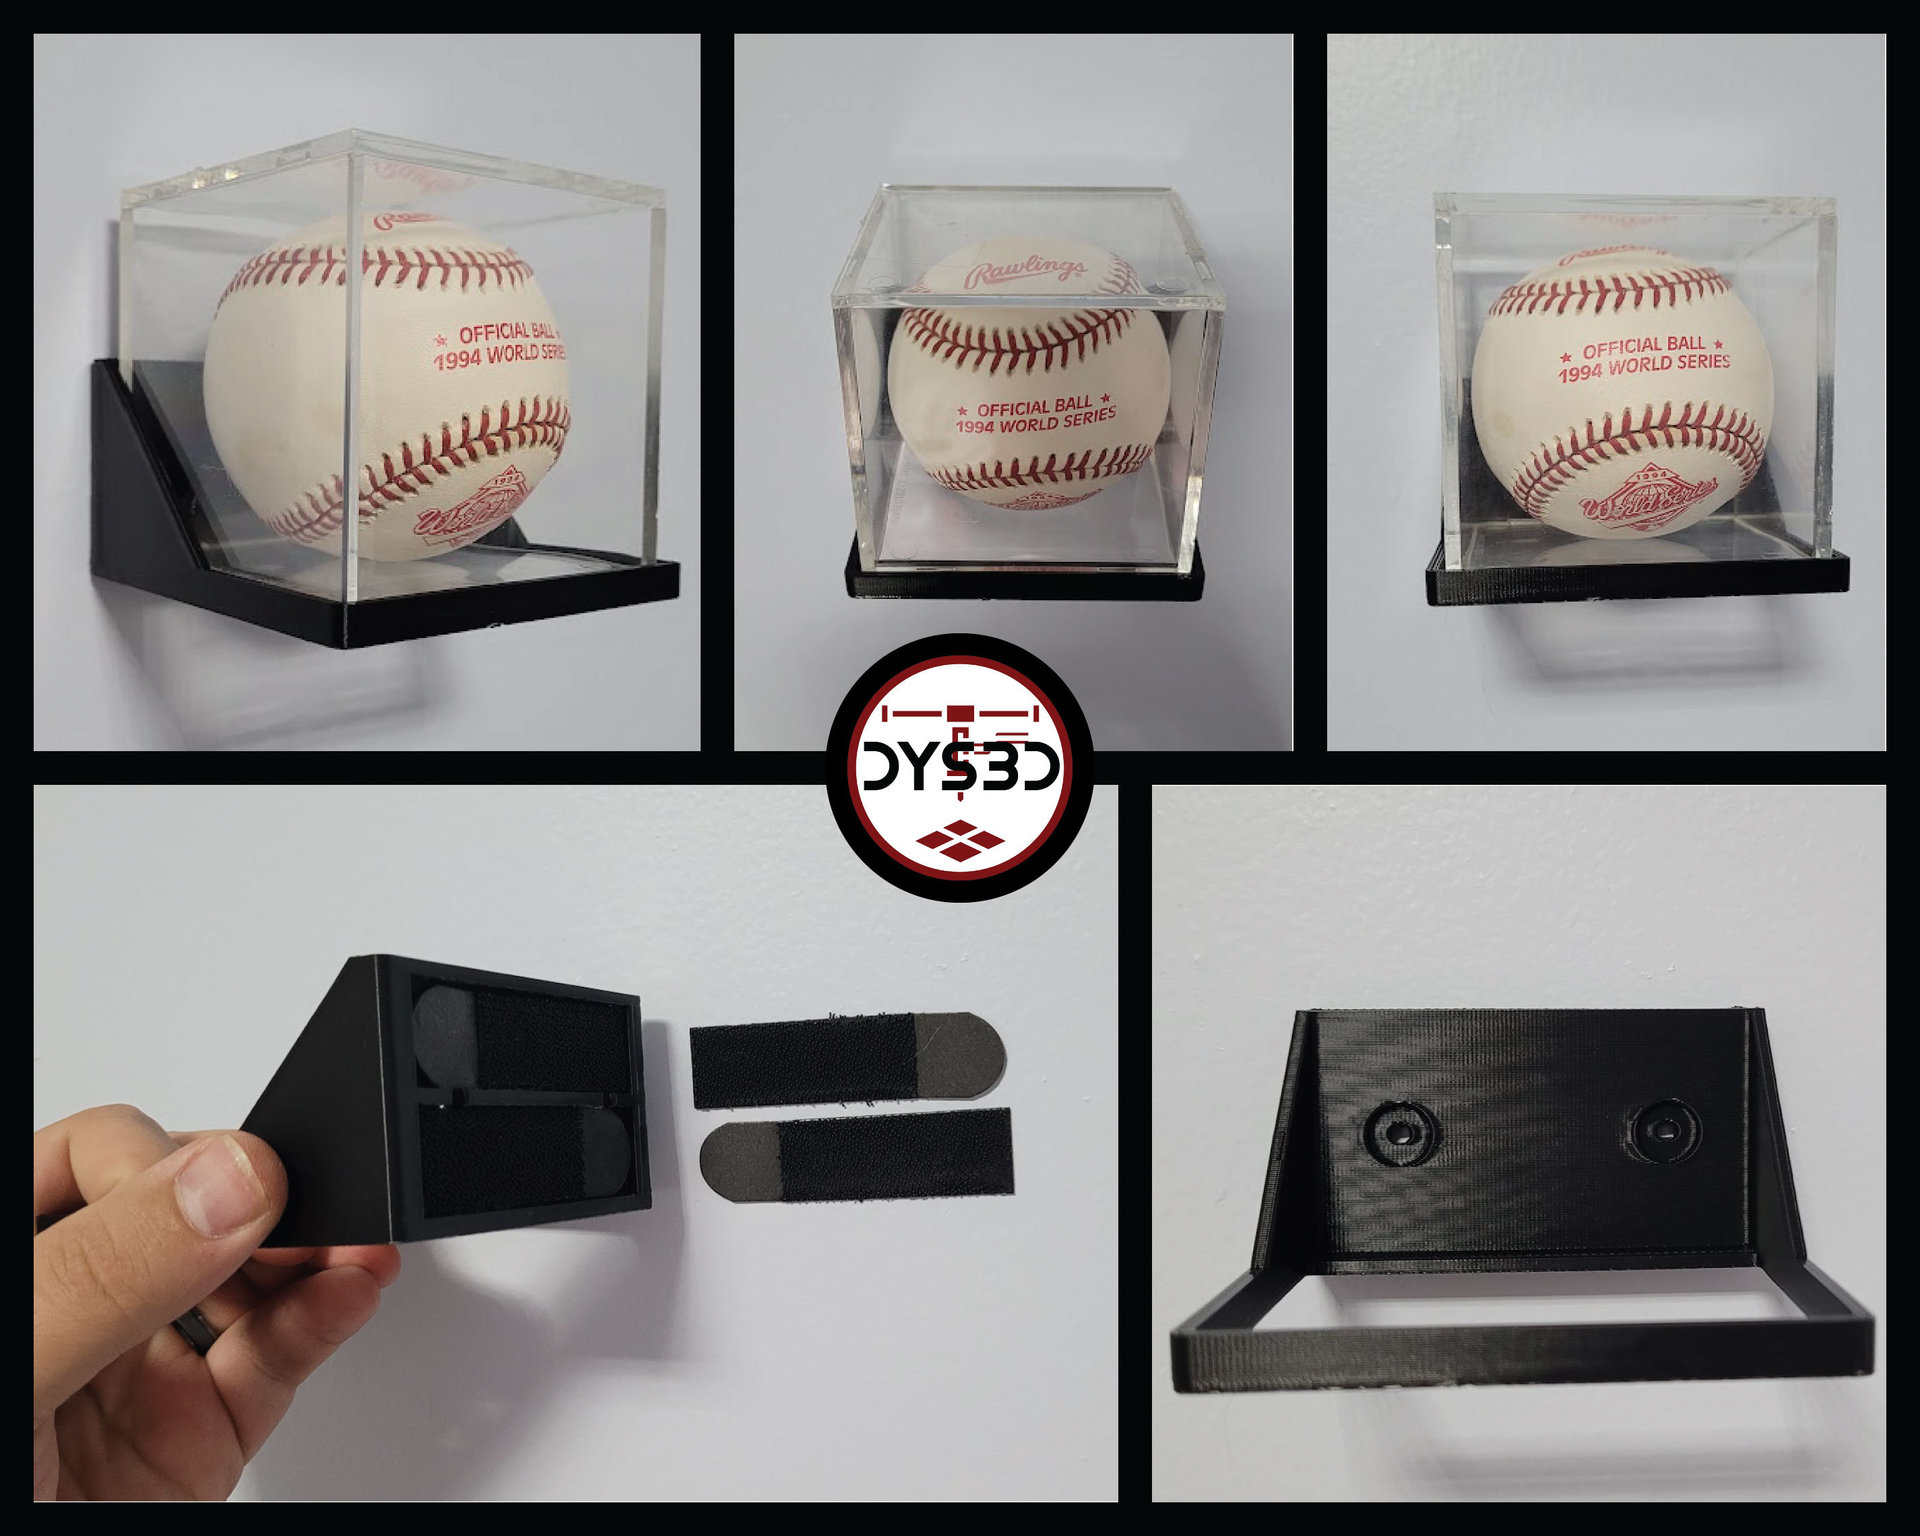 Baseball UV Case Wall Display Holder (Case NOT INCLUDED)